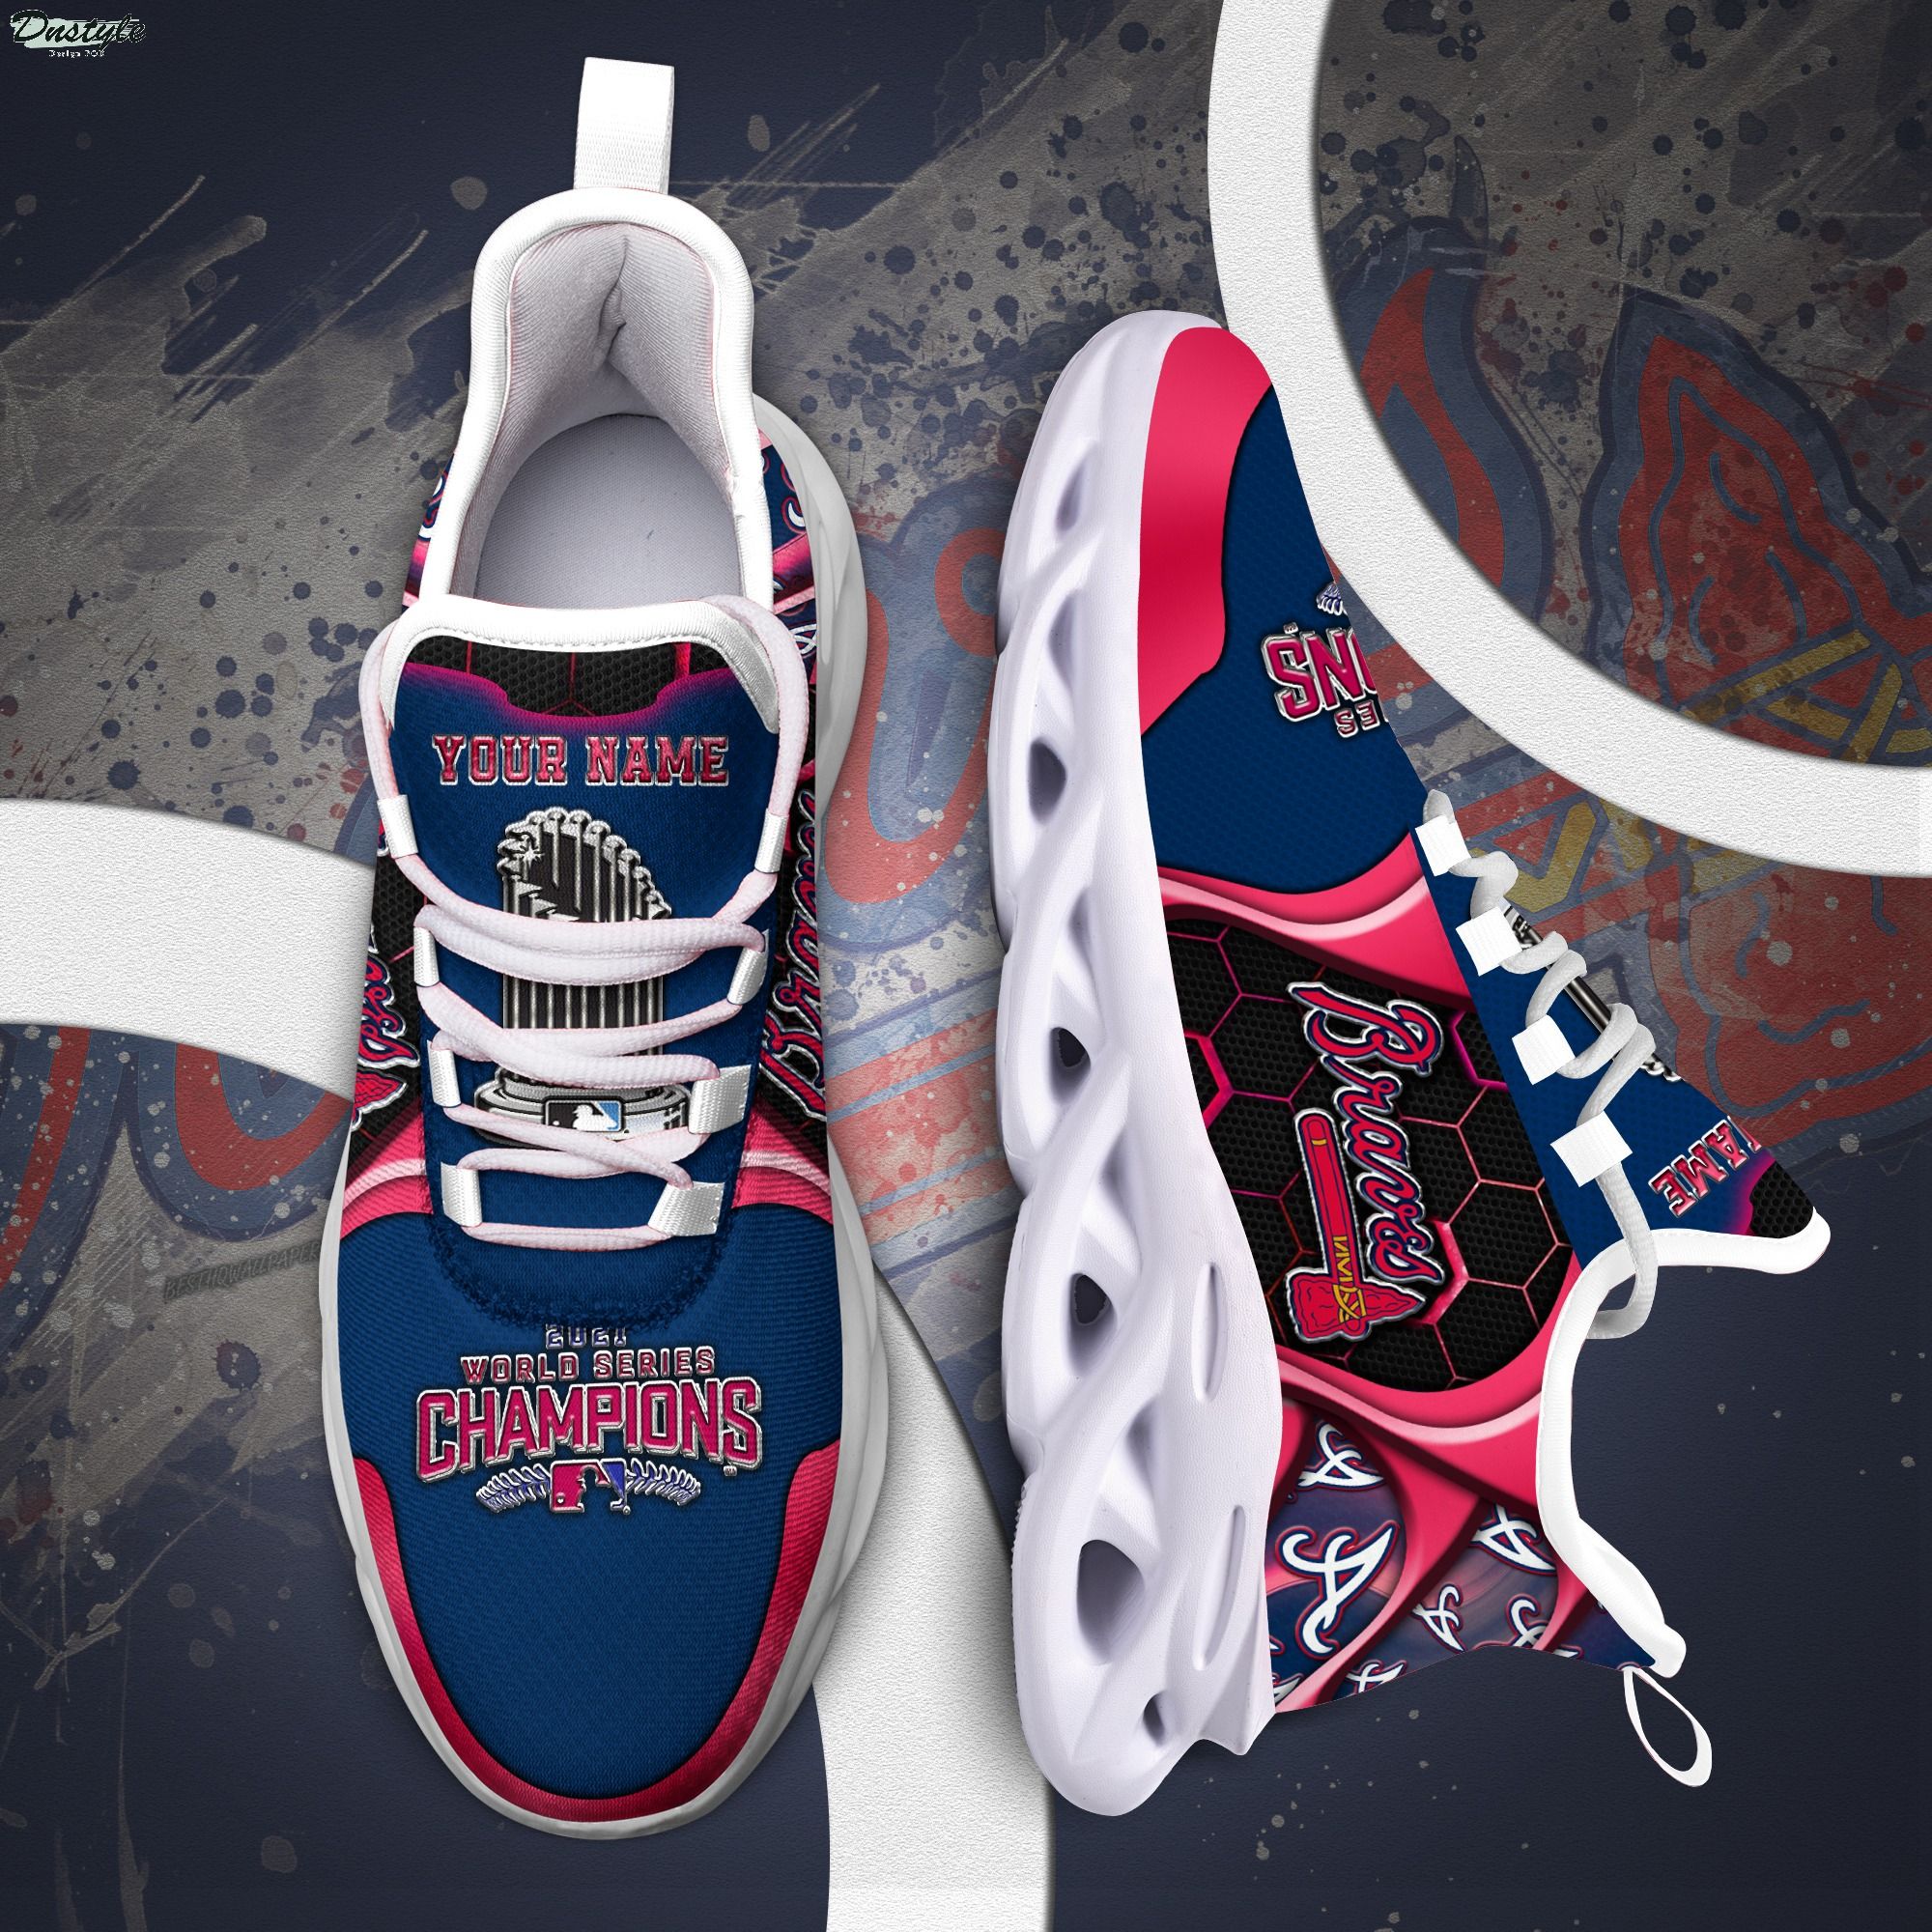 Atlanta Braves Champions 2021 World Series Champions Clunky Sneakers Max Soul Shoes